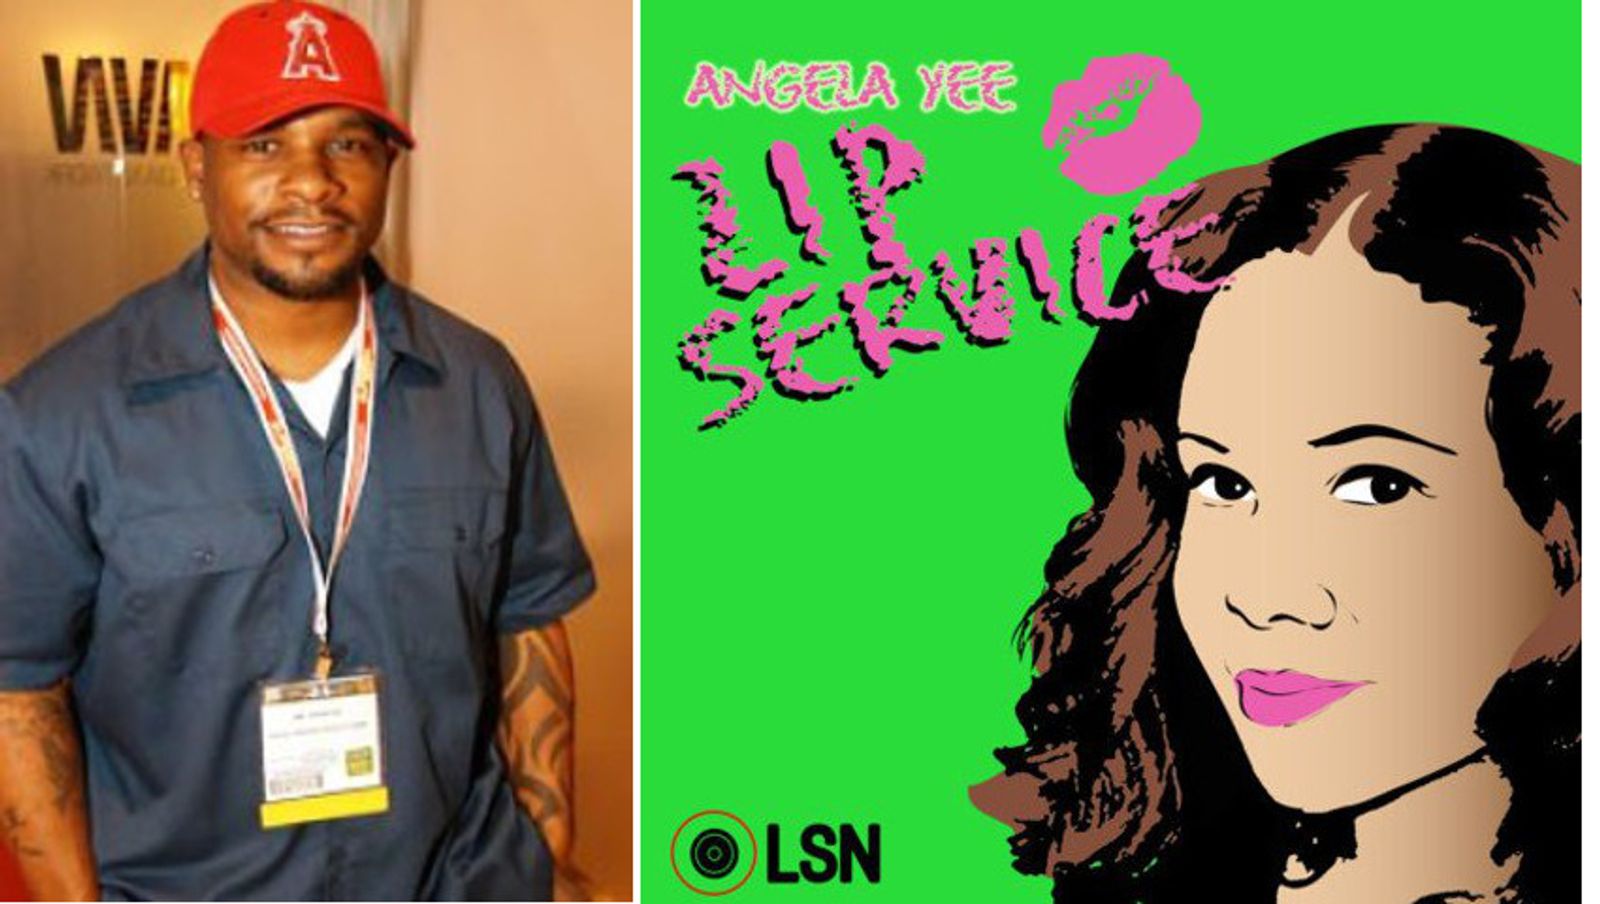 Mr. Marcus Appears on Angela Yee's 'Lip Service' Podcast | AVN